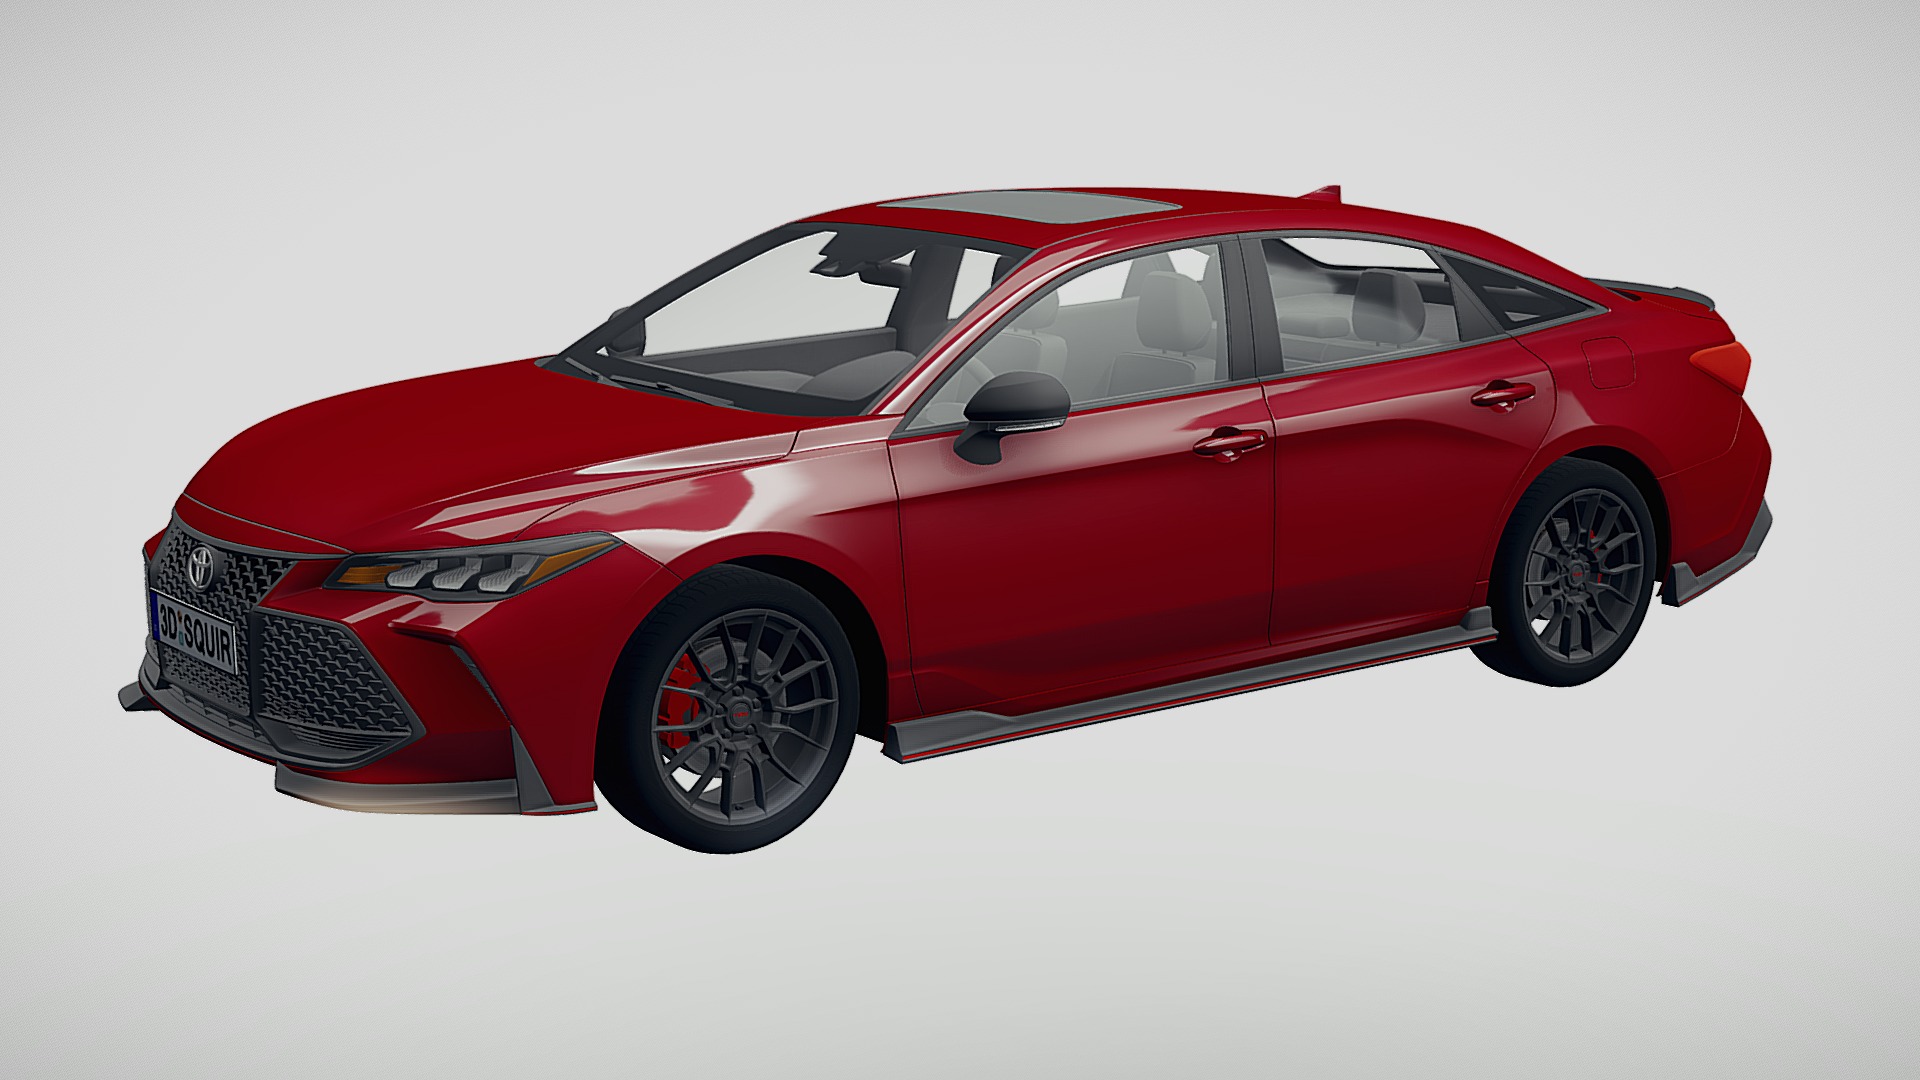 3D model Toyota Avalon TRD 2020 - This is a 3D model of the Toyota Avalon TRD 2020. The 3D model is about a red car with black wheels.